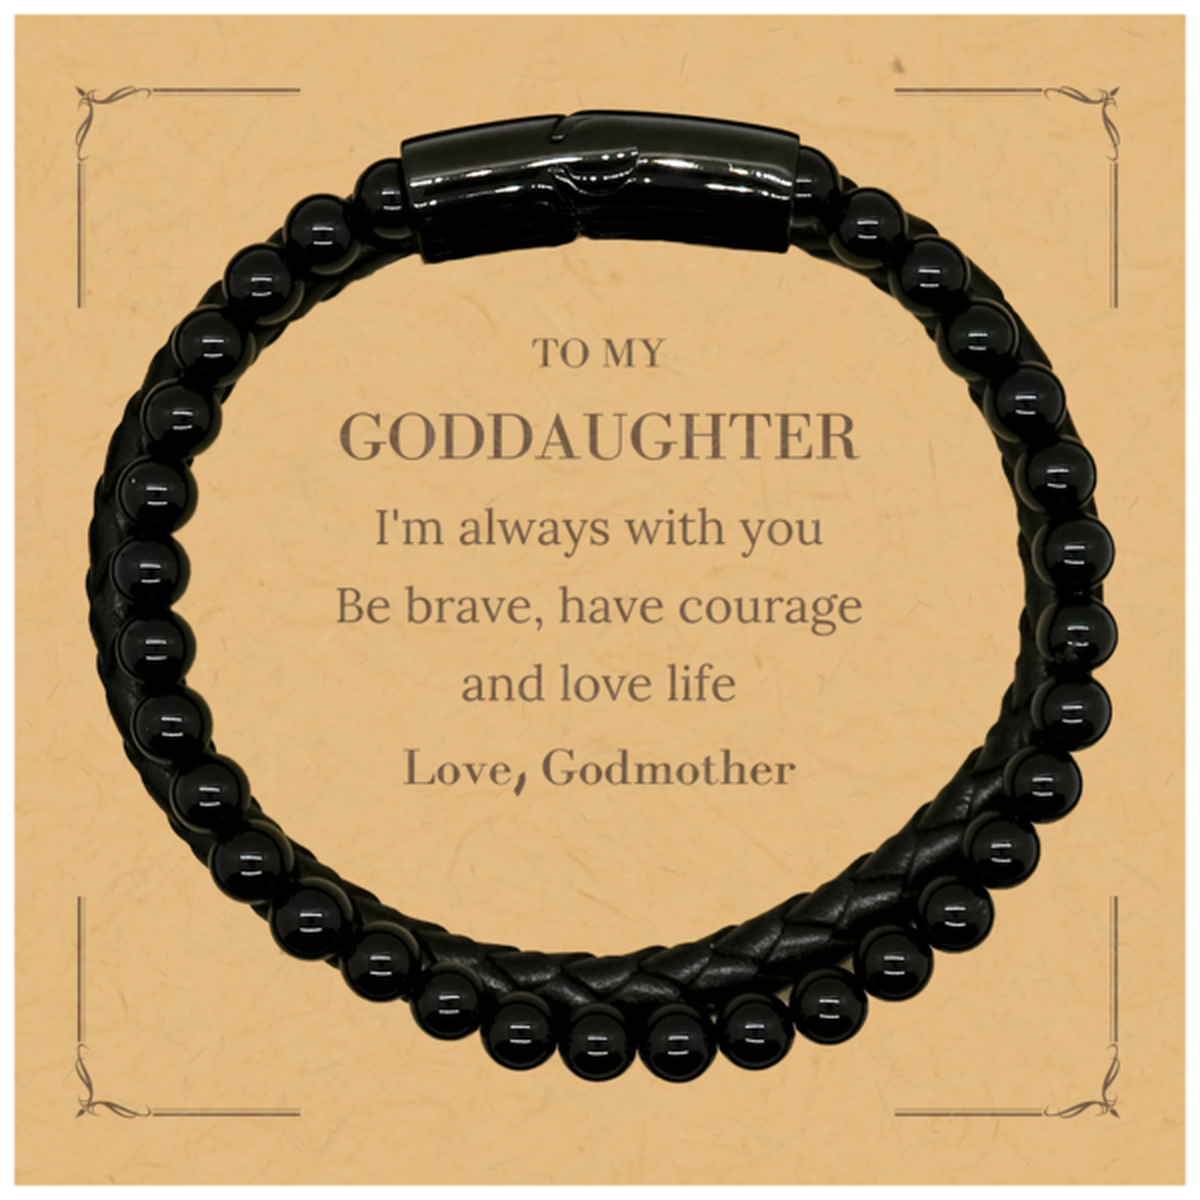 To My Goddaughter Gifts from Godmother, Unique Stone Leather Bracelets Inspirational Christmas Birthday Graduation Gifts for Goddaughter I'm always with you. Be brave, have courage and love life. Love, Godmother